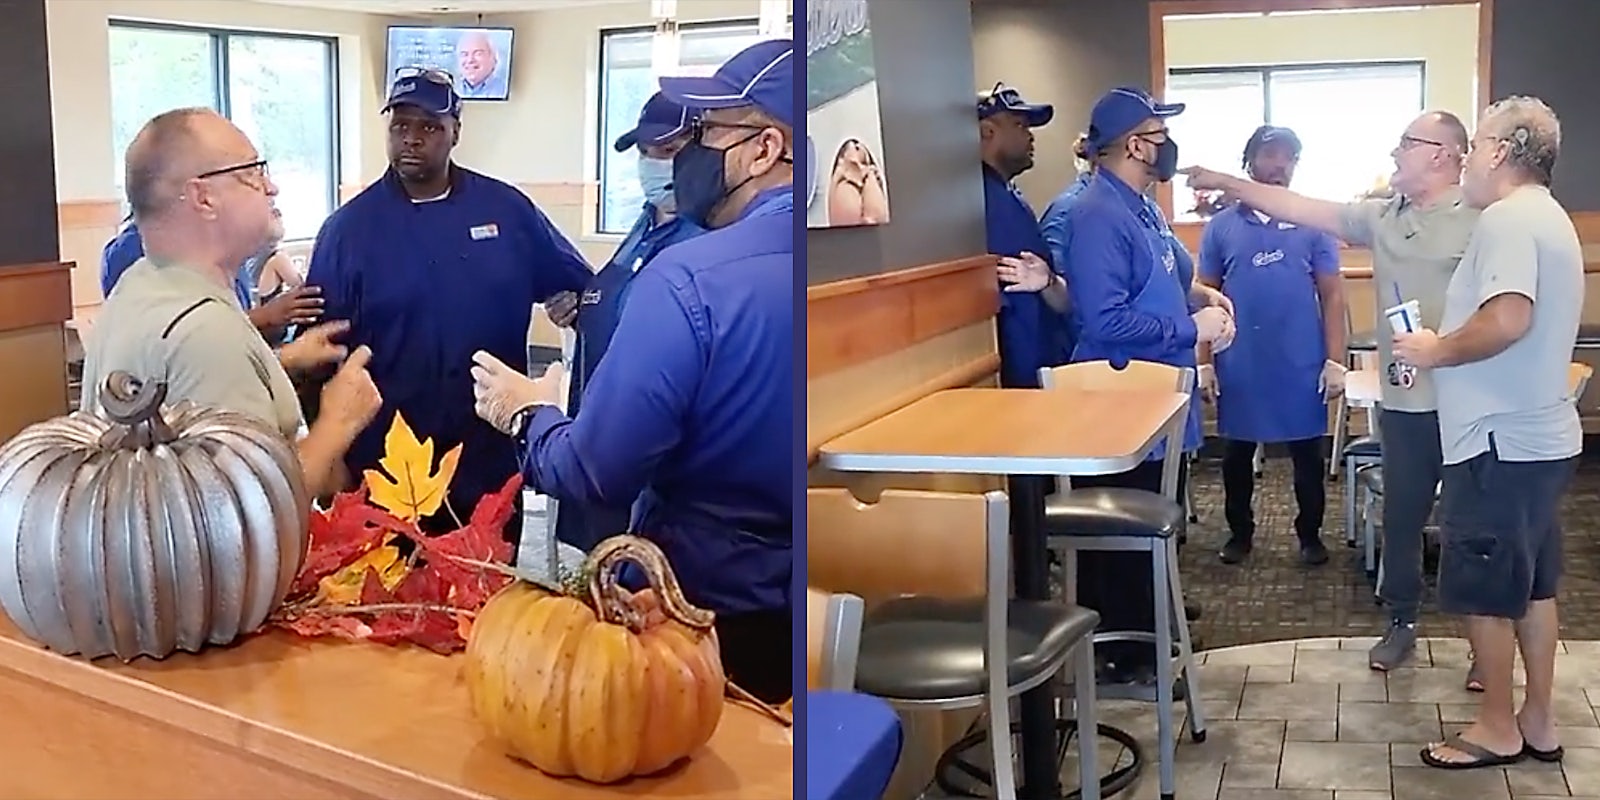 A man yelling at fast food workers.